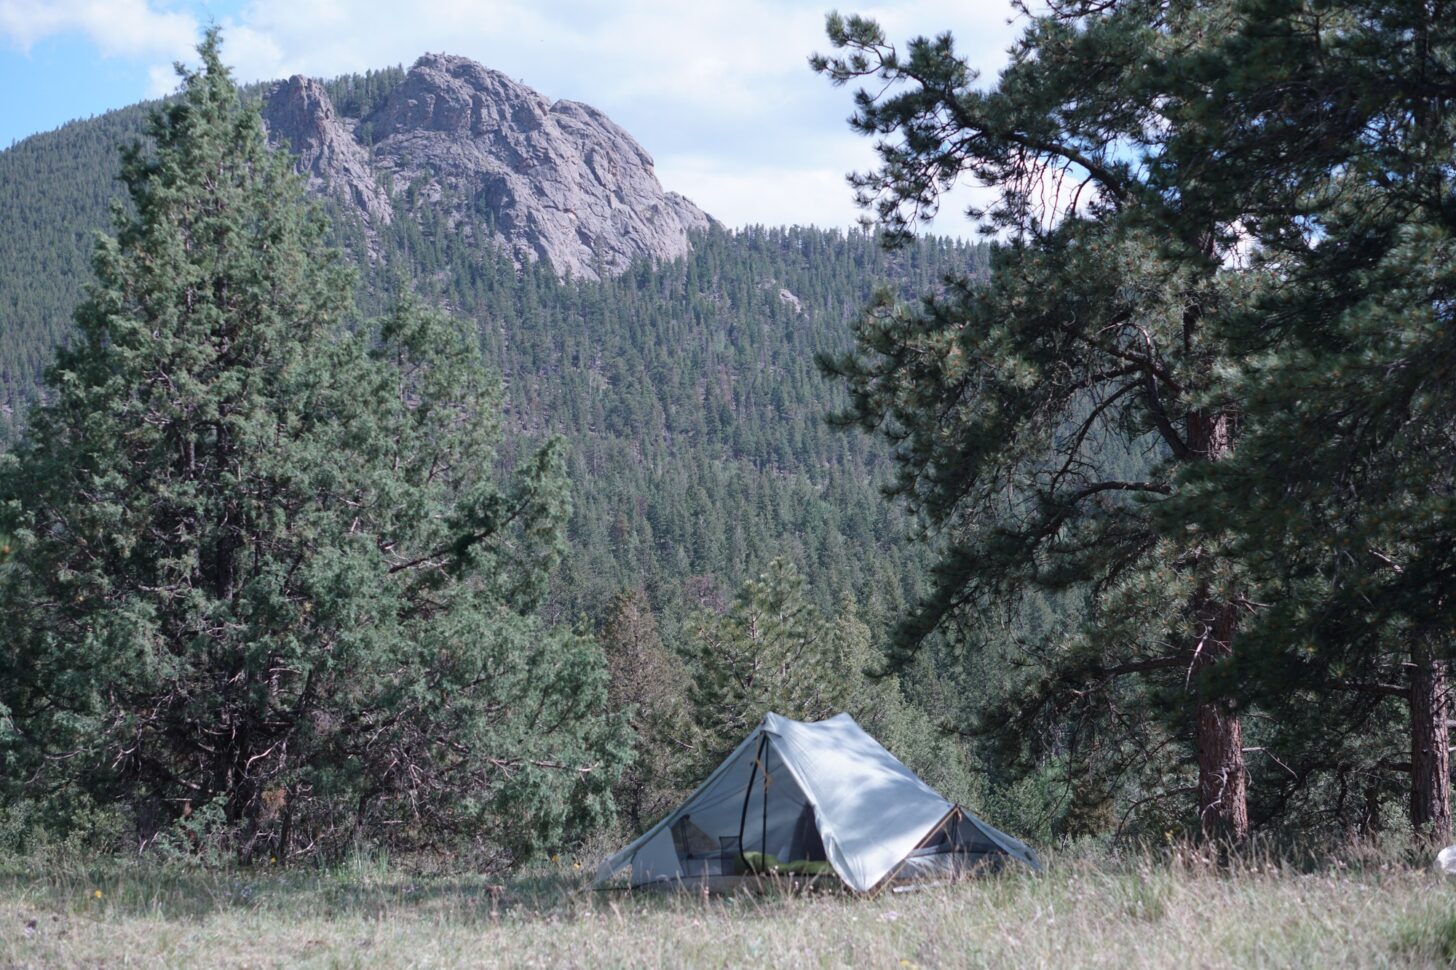 a Tarptent Dipole small in the frame with a mountain overhead.